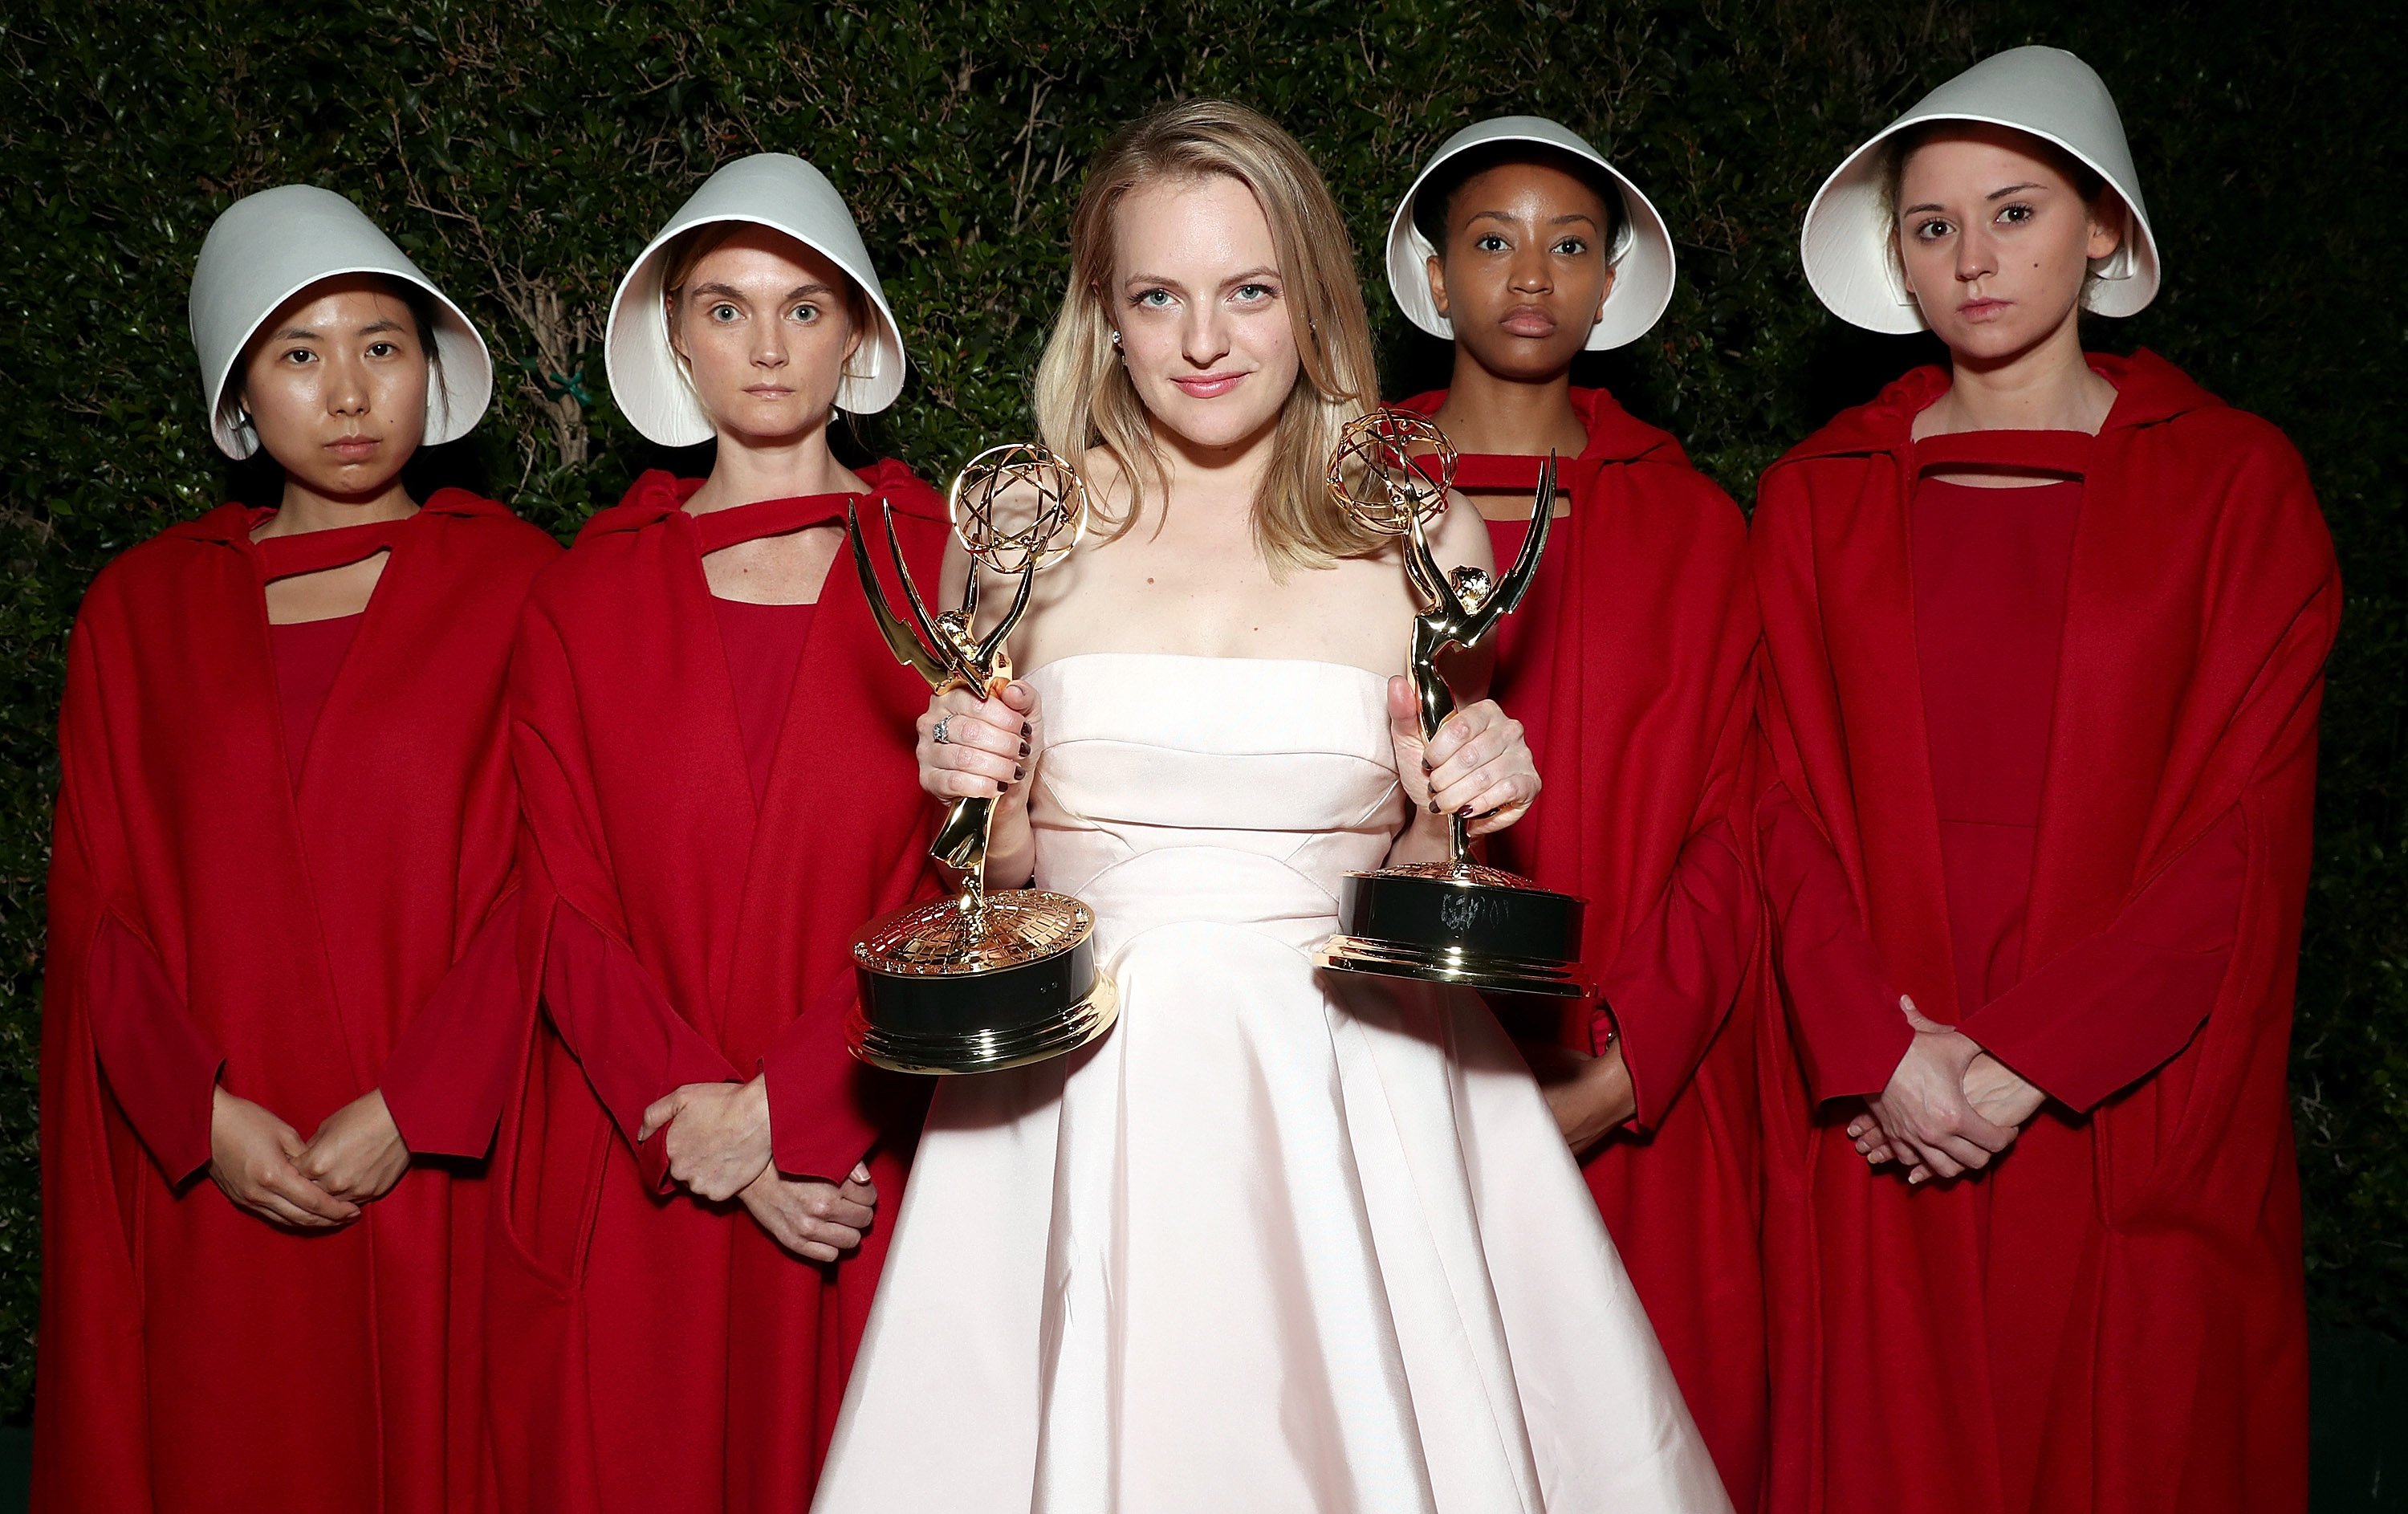 Elisabeth Moss with awards and women in The Handmaid's Tale outfits 